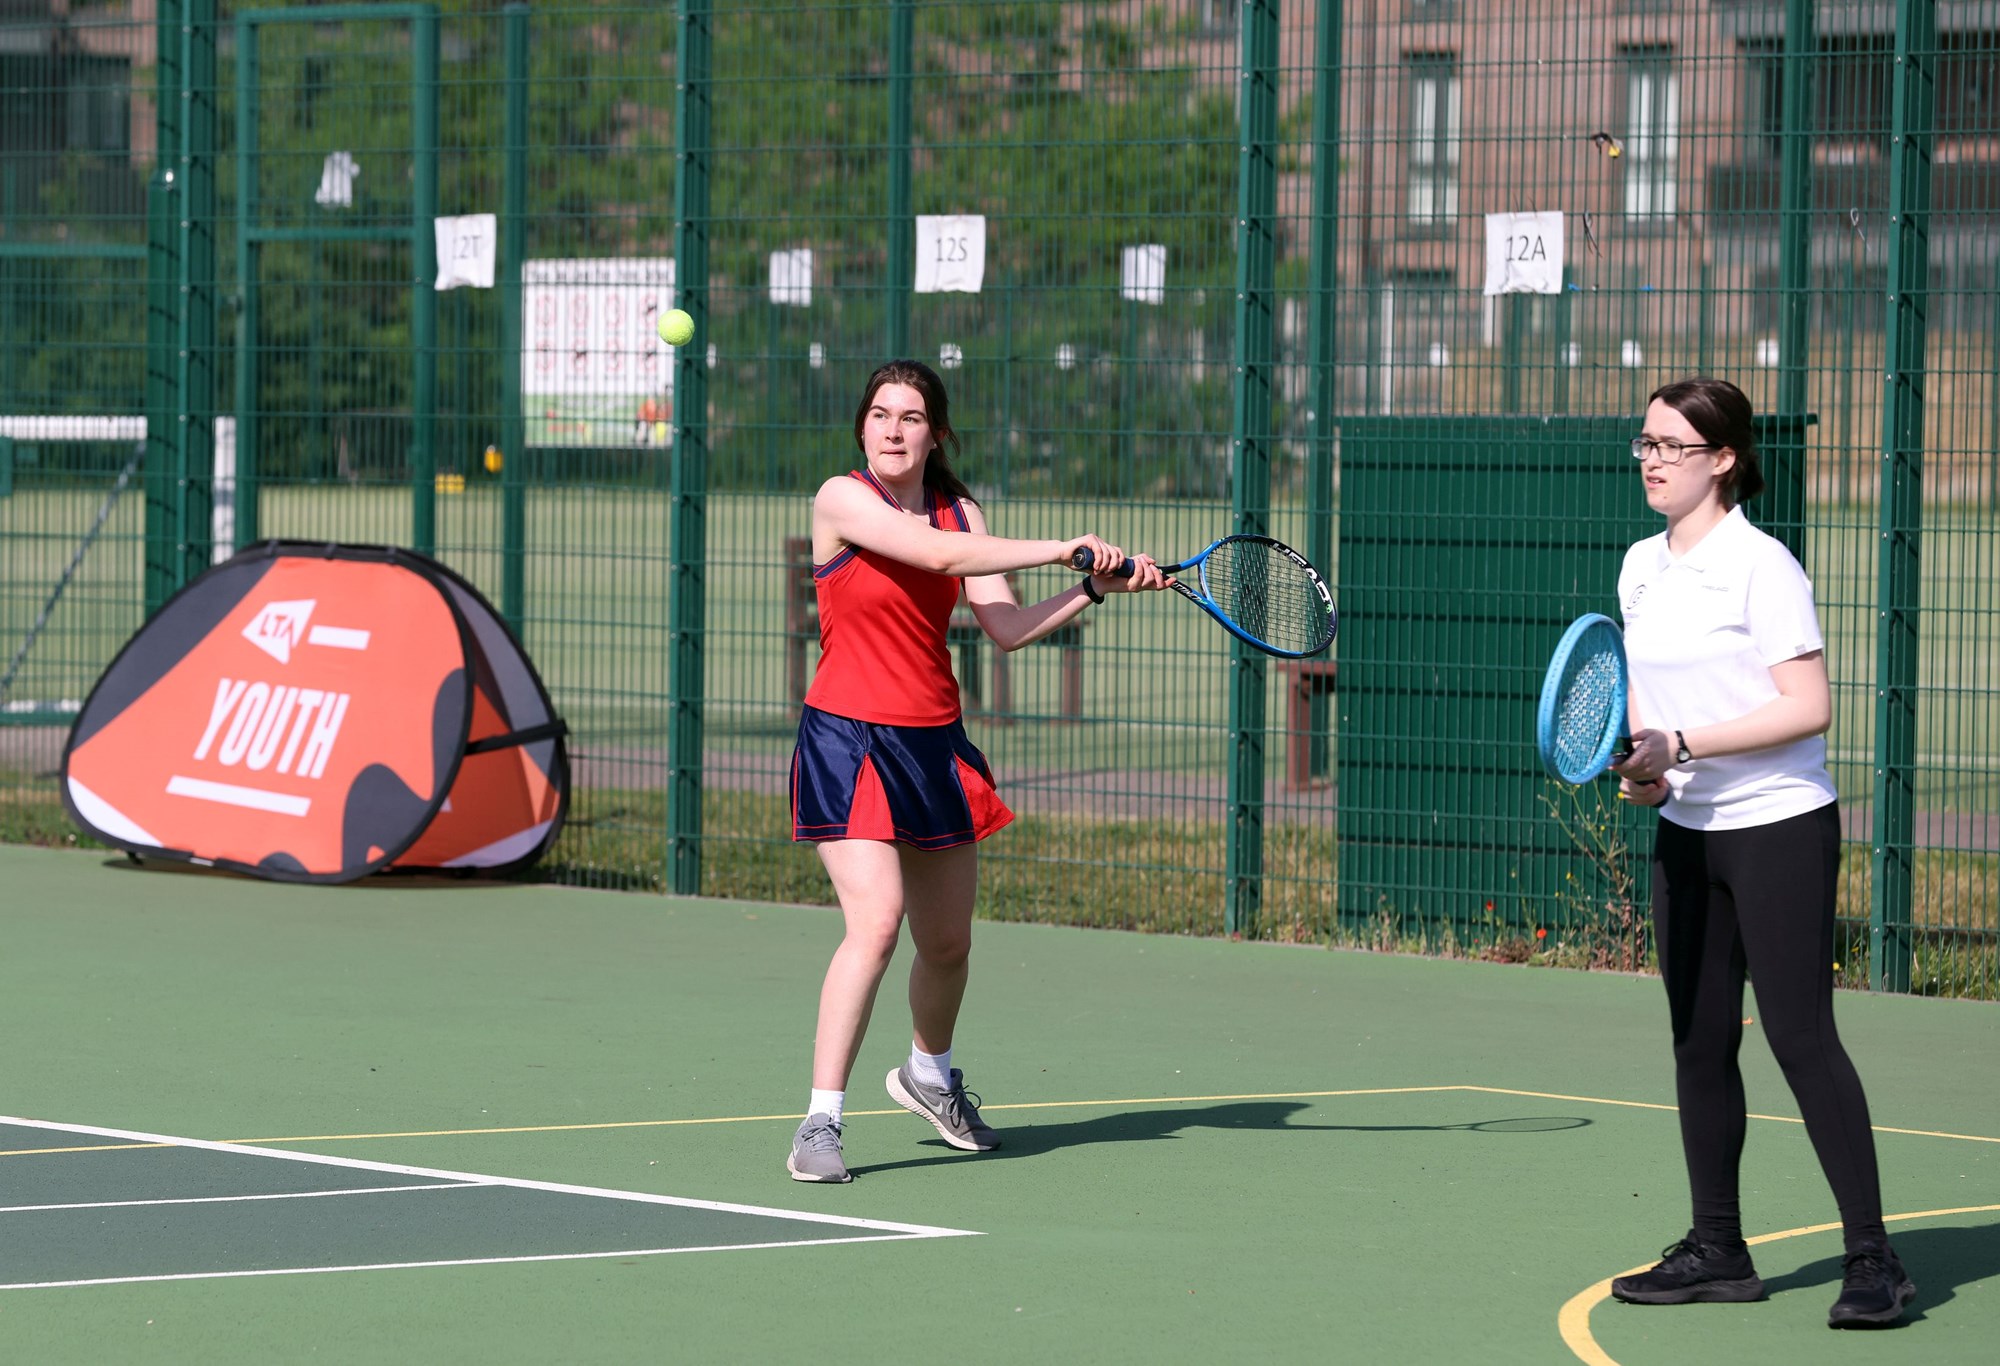 Students on court during the LTA Youth Session with St Paul's Way School